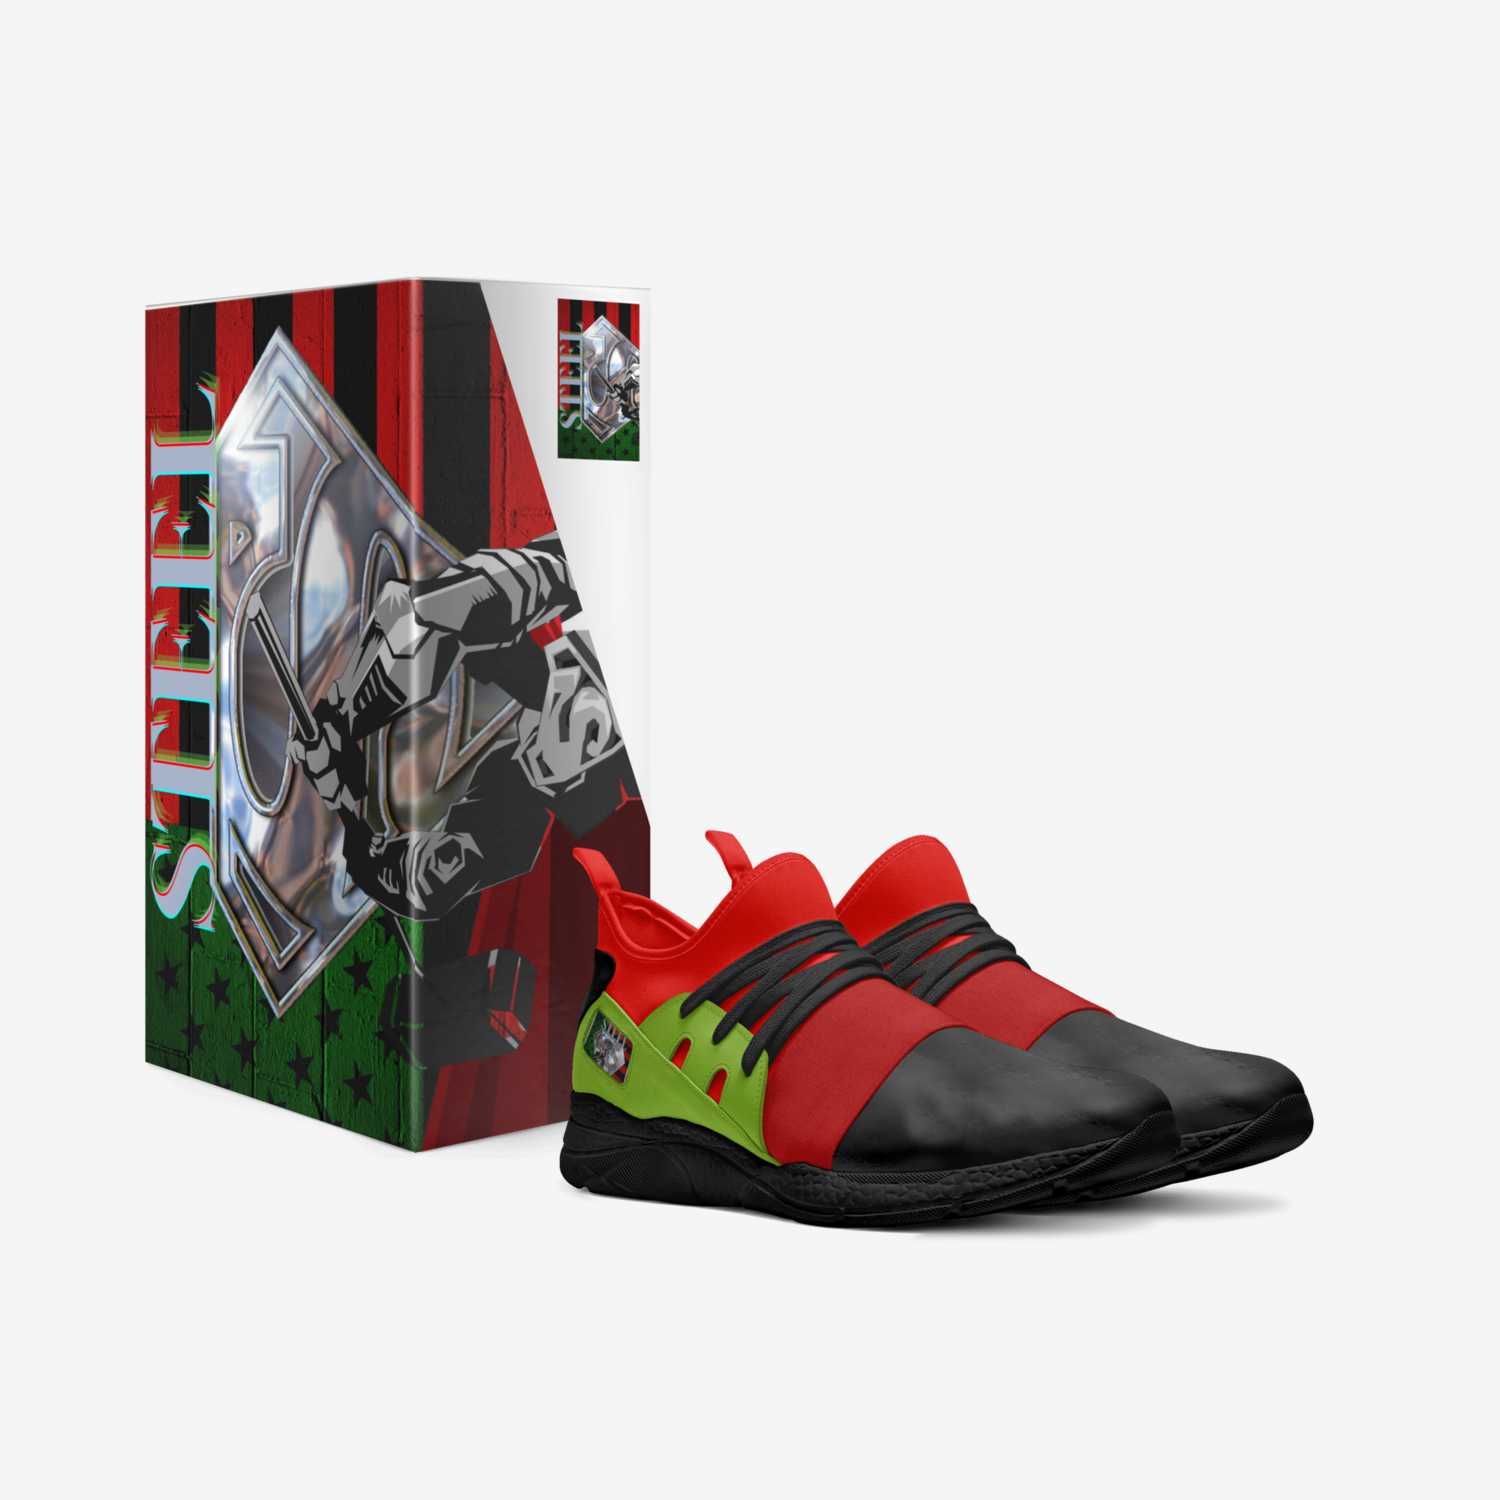 Legends R Super custom made in Italy shoes by Nsf Radio Inc. | Box view